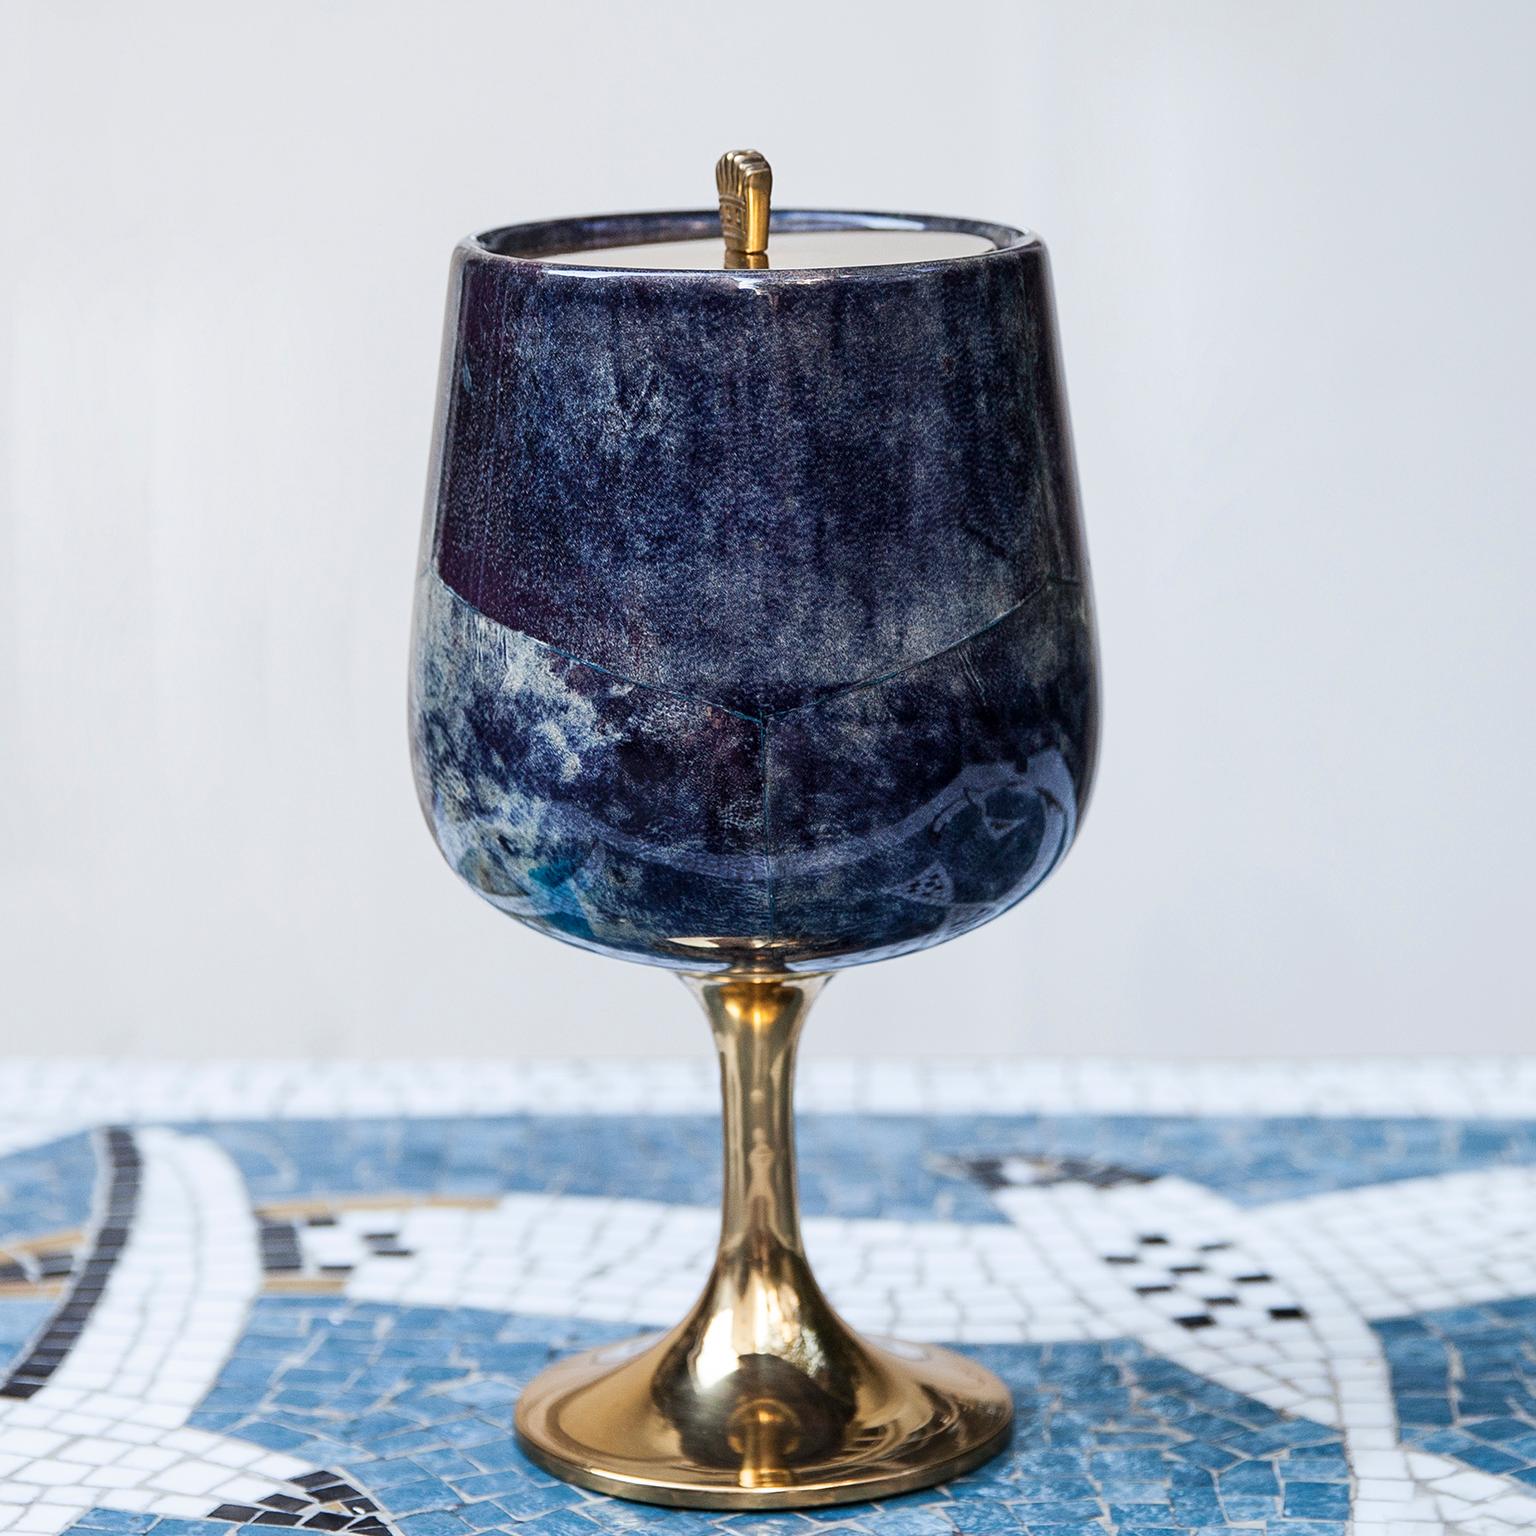 Wonderful ice bucket of Aldo Tura in lacquered goatskin.
This ice bucket was executed, circa 1960 in a blue parchment and brass applications and a glass inlay. Along with artists like Piero Fornasetti and Carlo Bugatti, Aldo Tura (1909-1963)